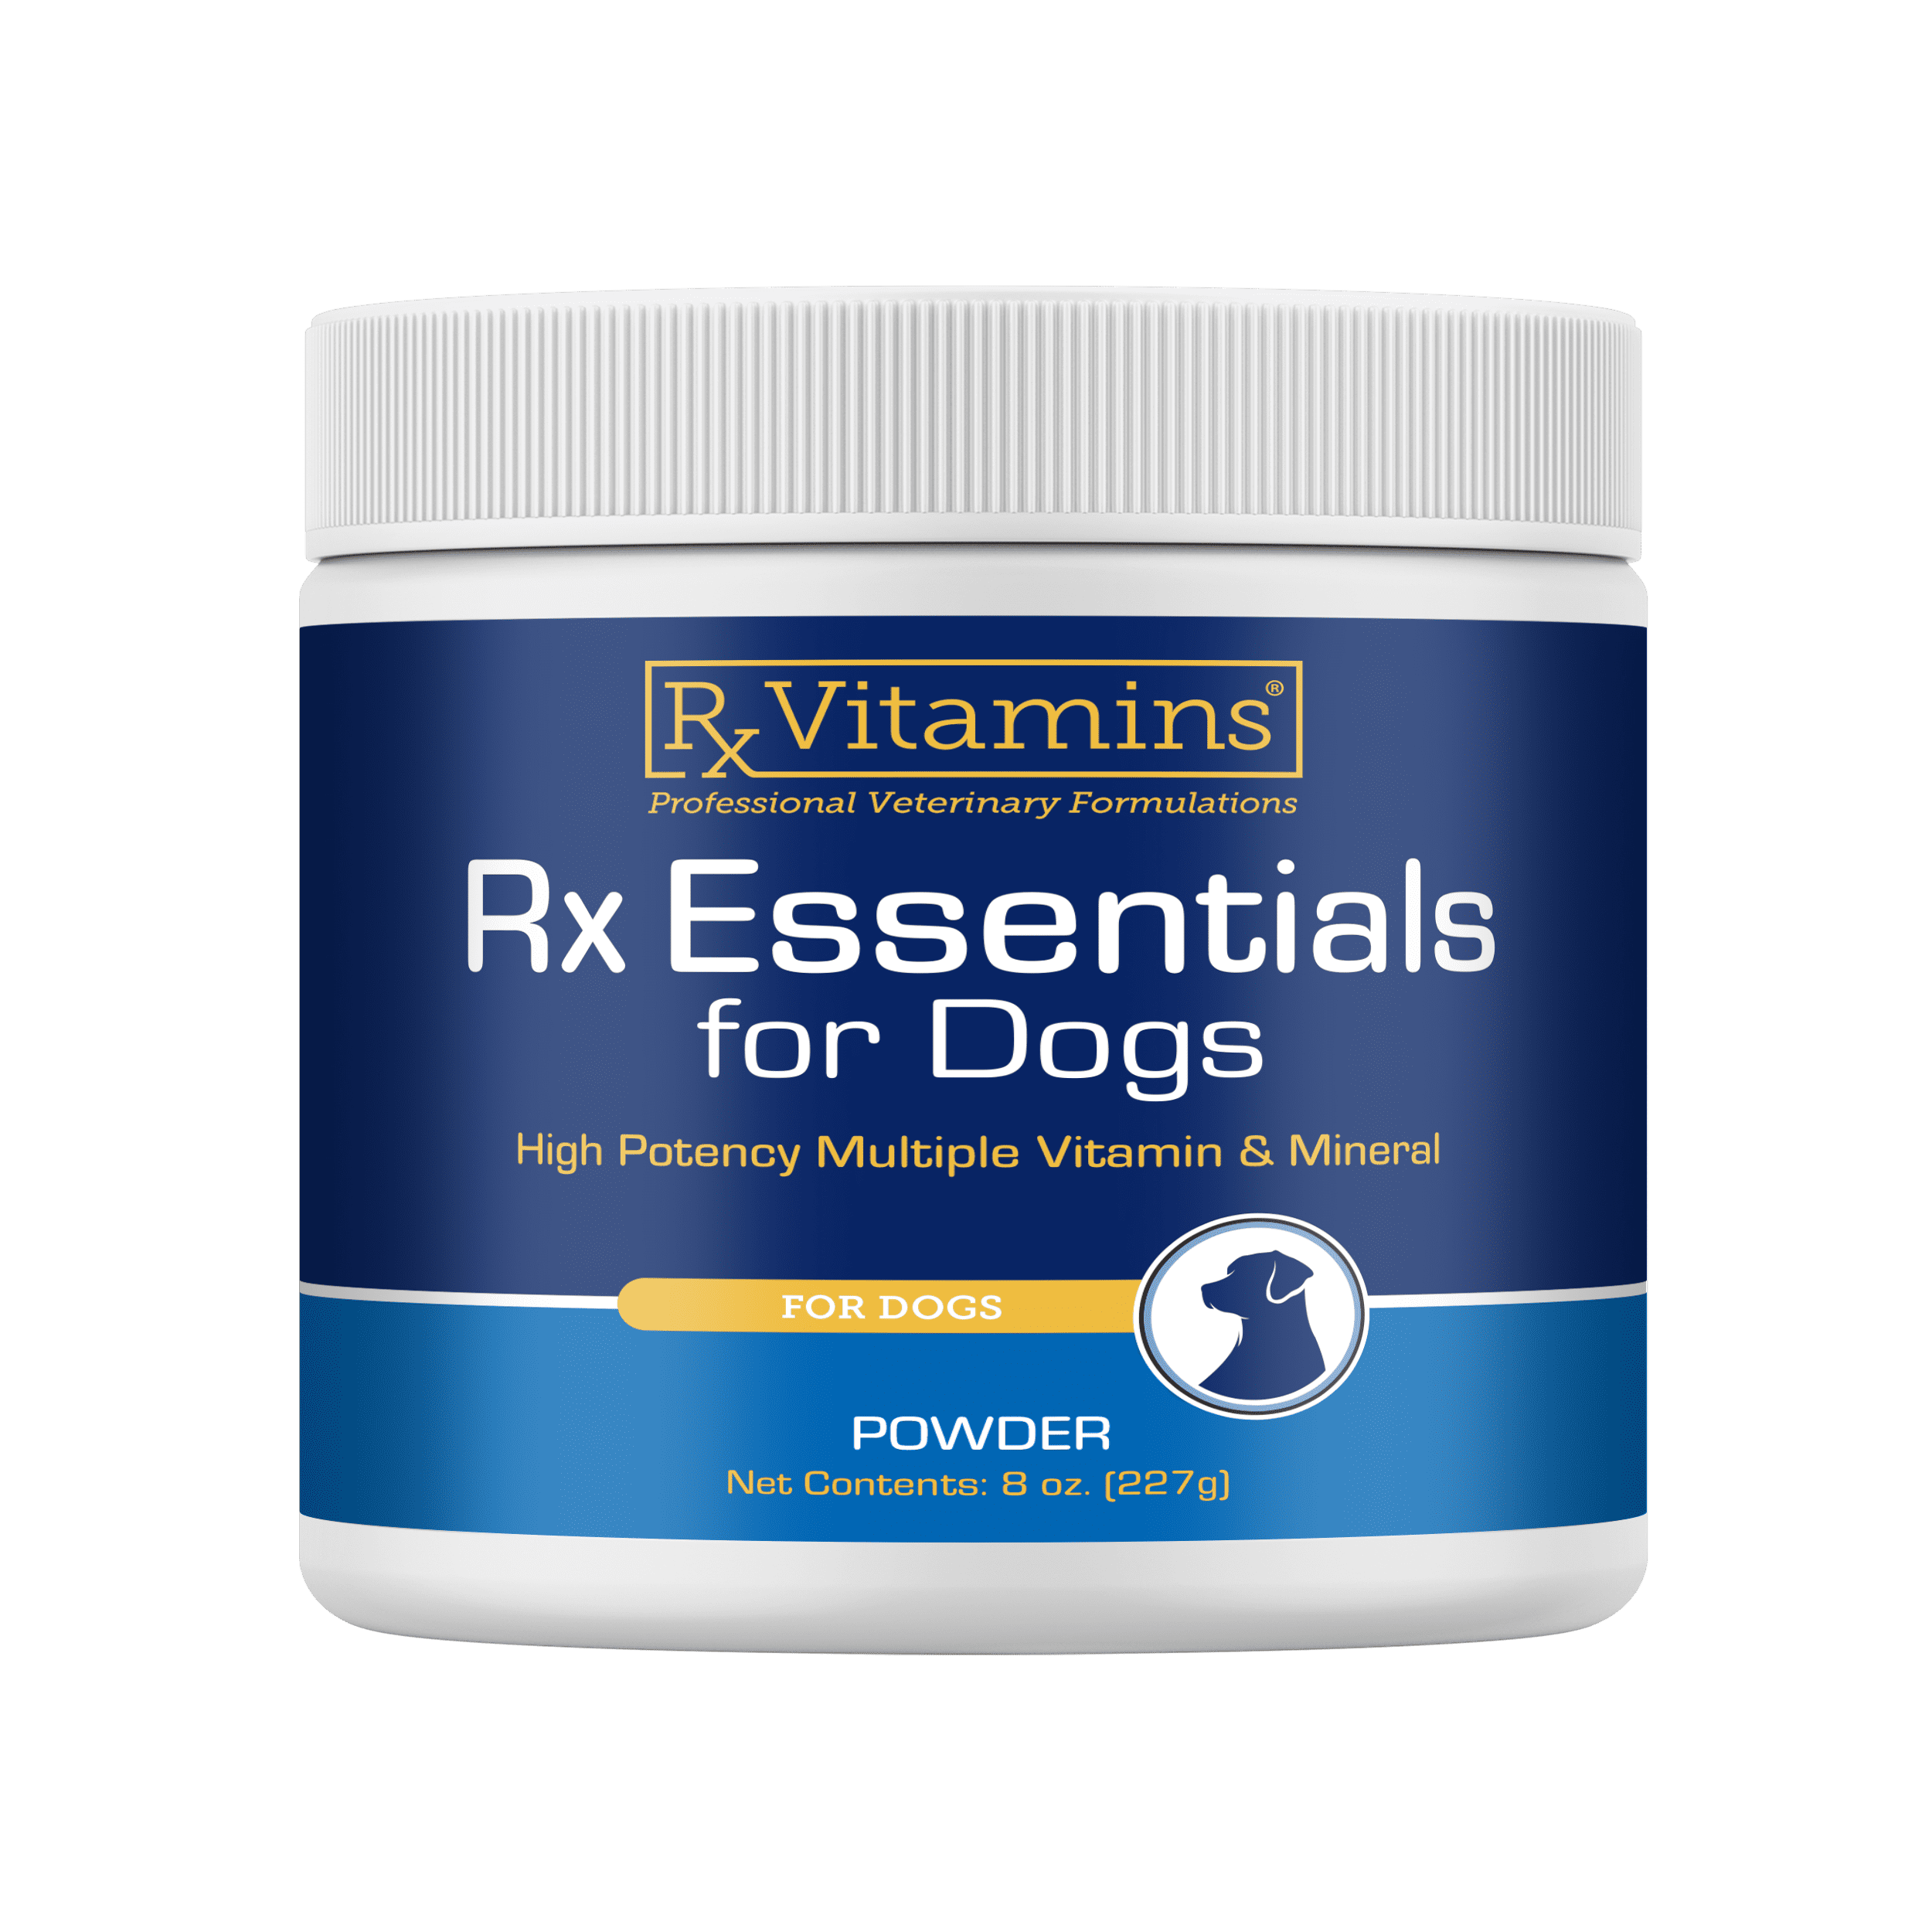 RX Essentials for Dogs